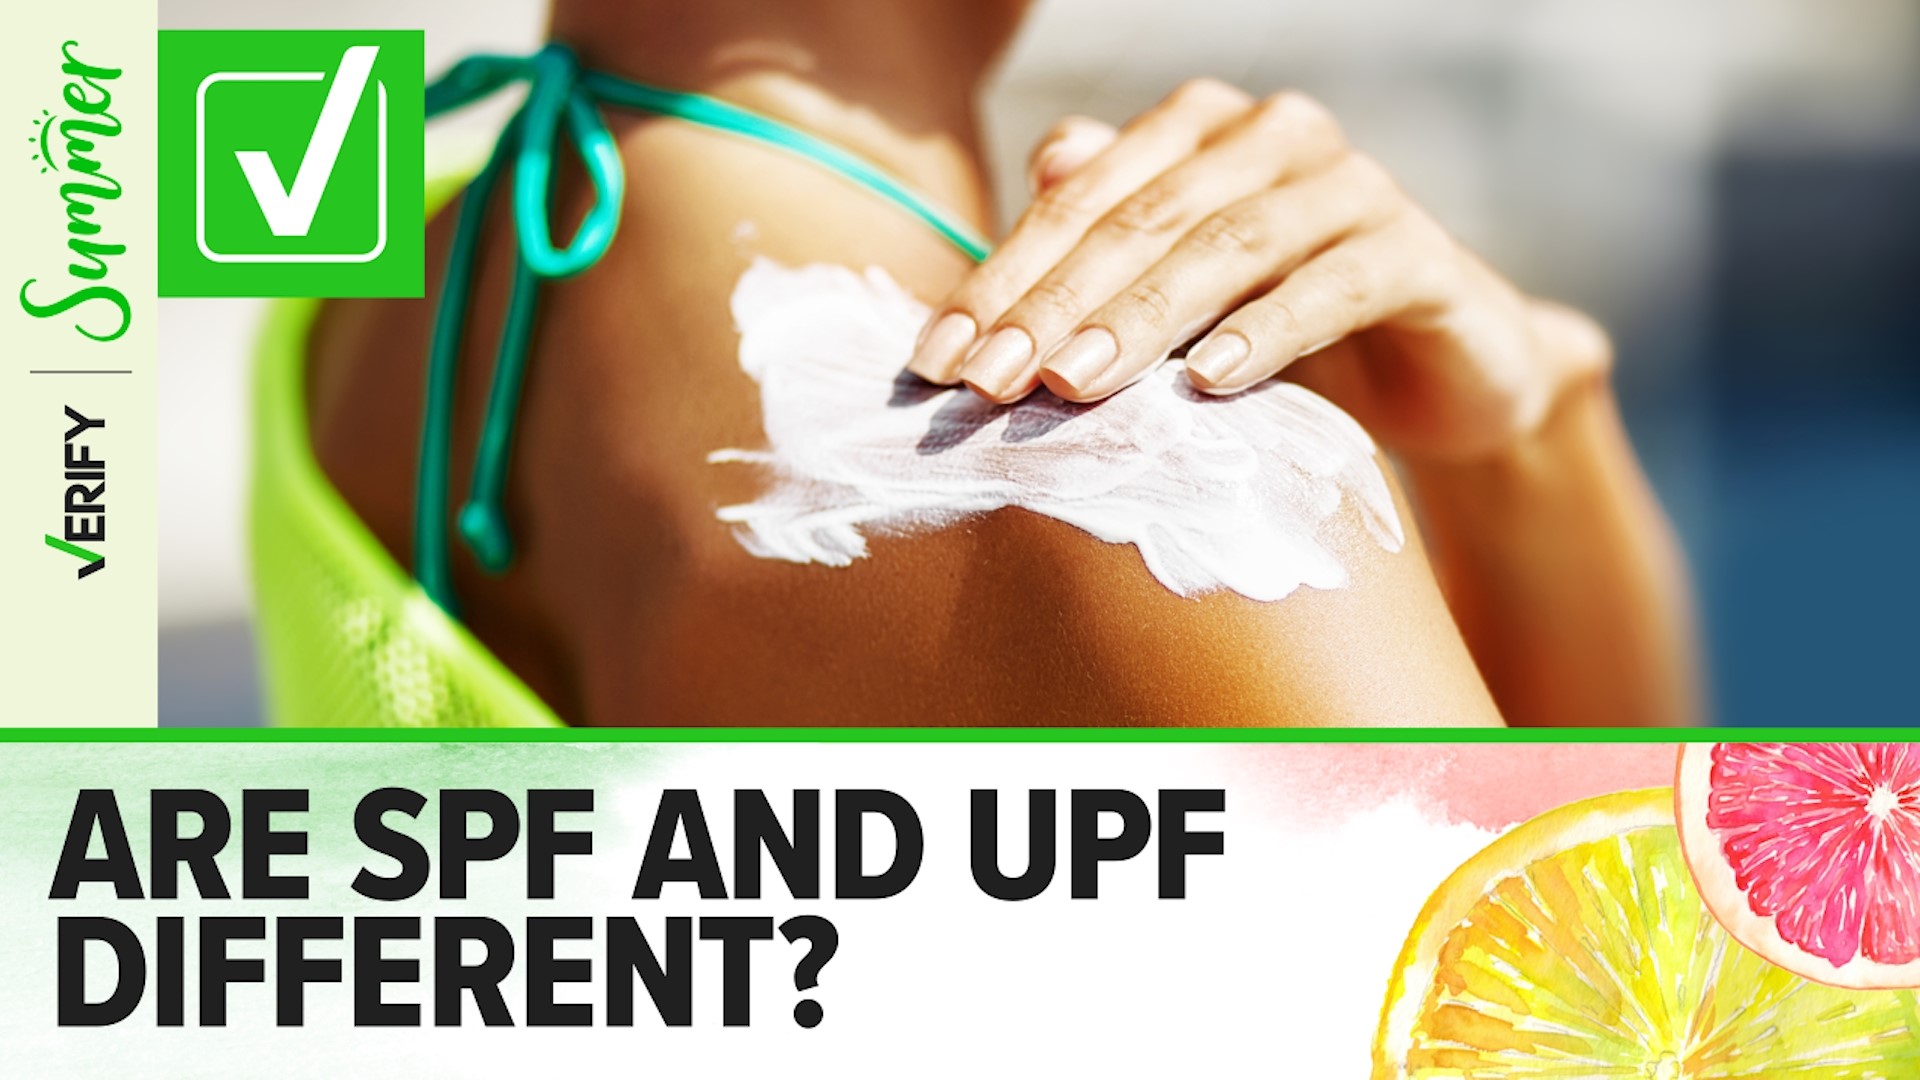 SPF is typically used to measure how long sunscreen protects you from the sun. UPF typically measures how much of the sun’s UV rays are blocked by clothing fabric.